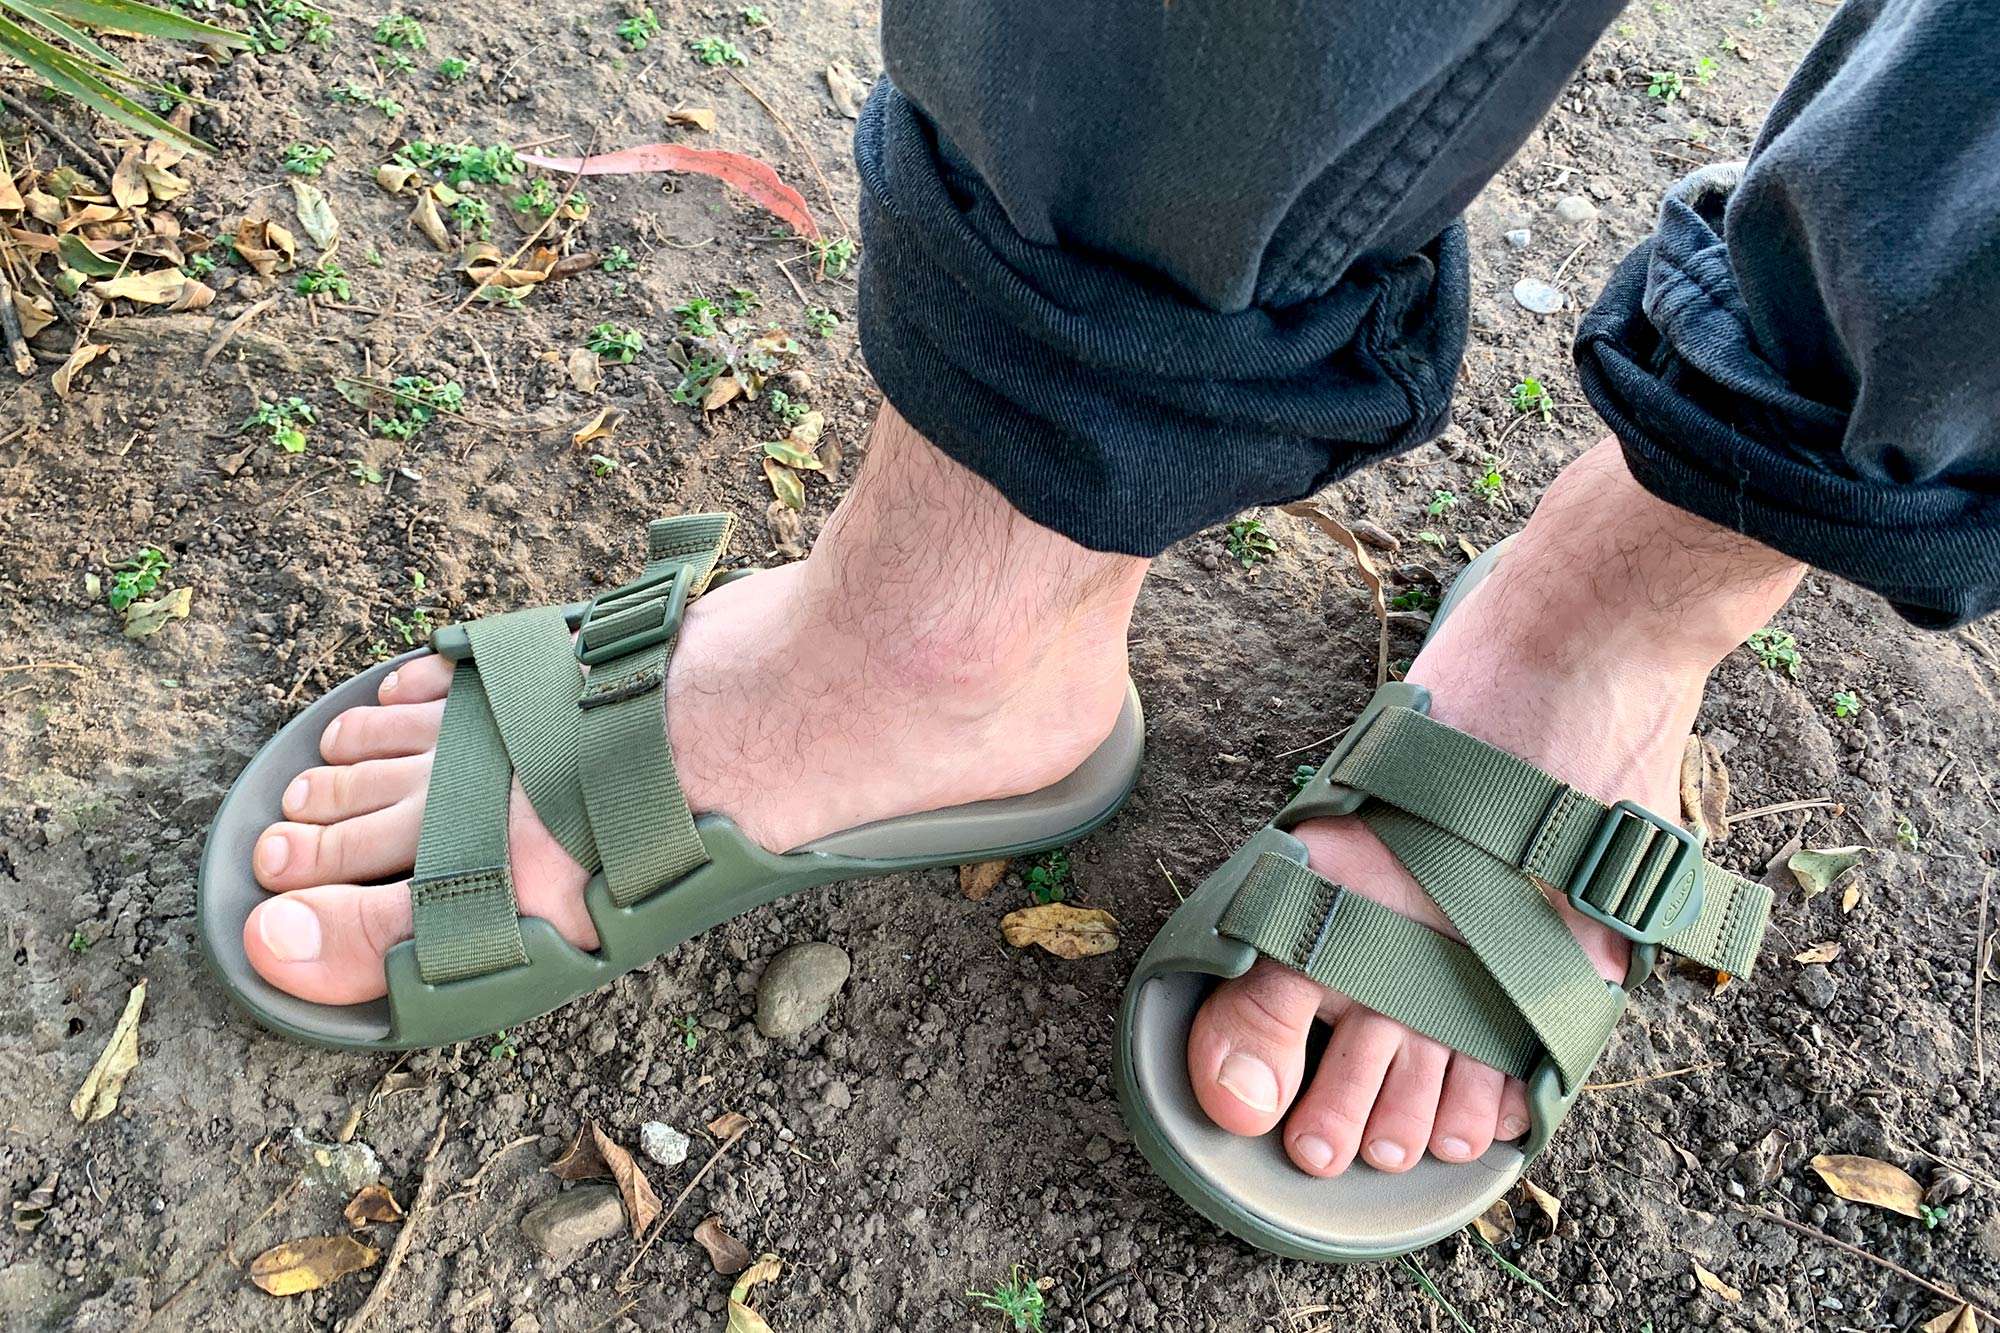 chaco sandals on feet